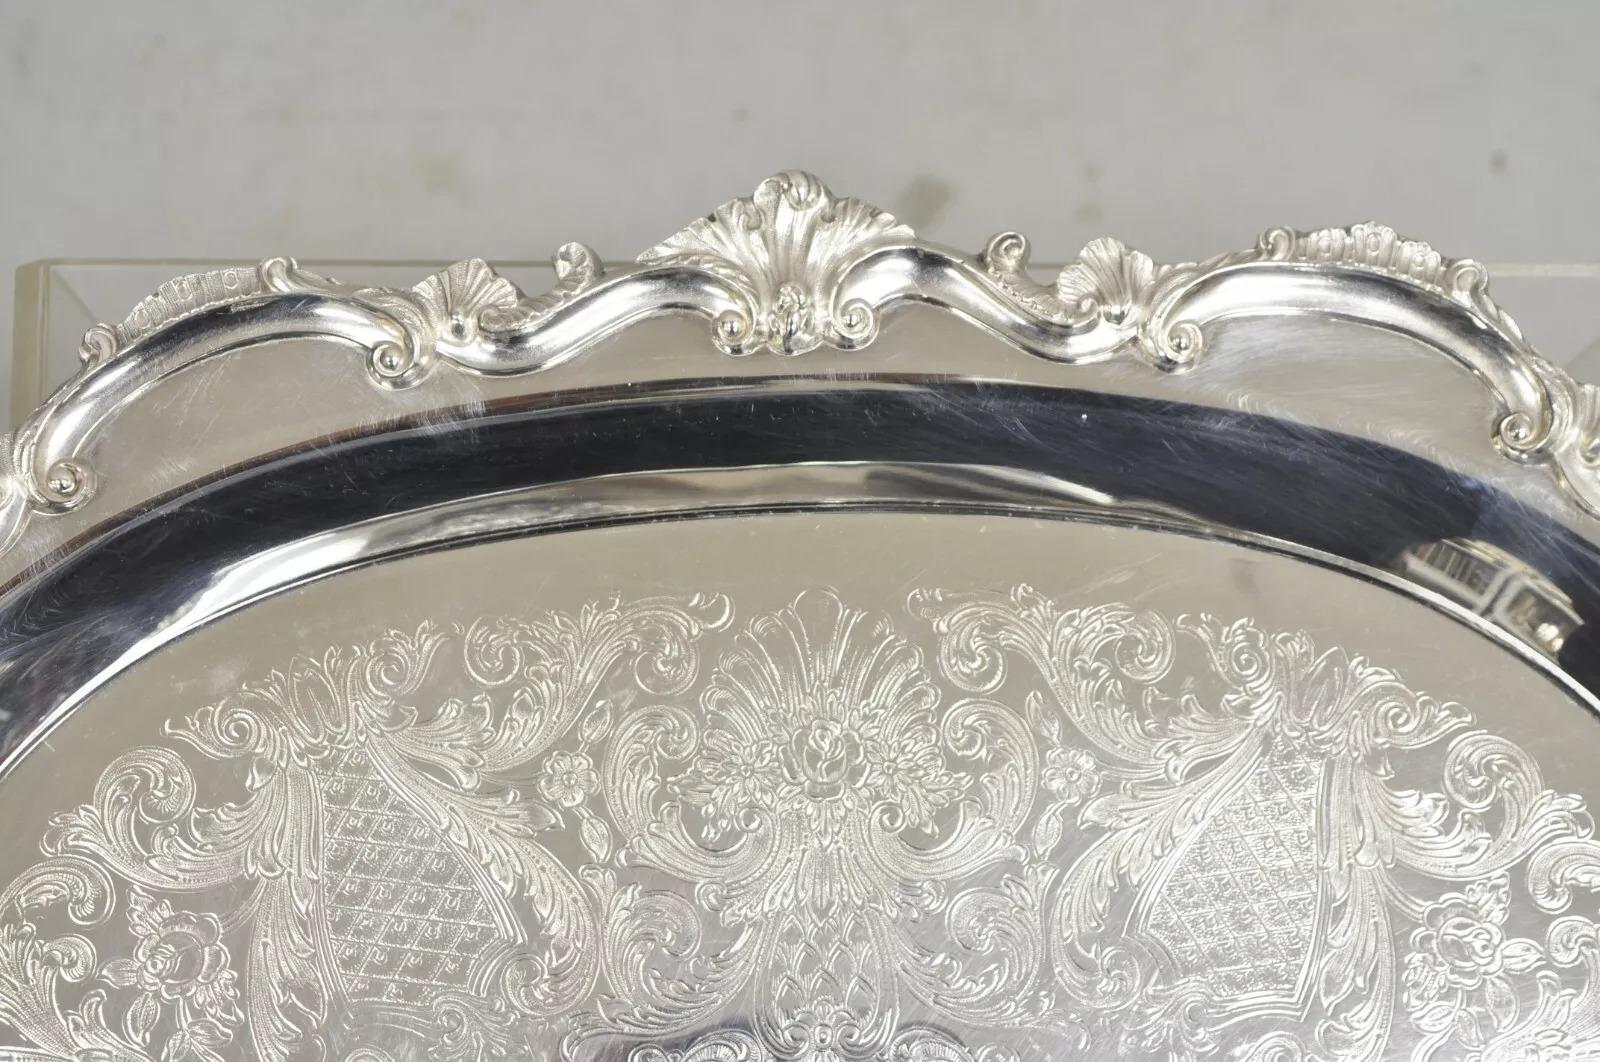 EPCA Bristol Silverplate by Poole 145 Silver Plated Victorian Style Serving Tray For Sale 1